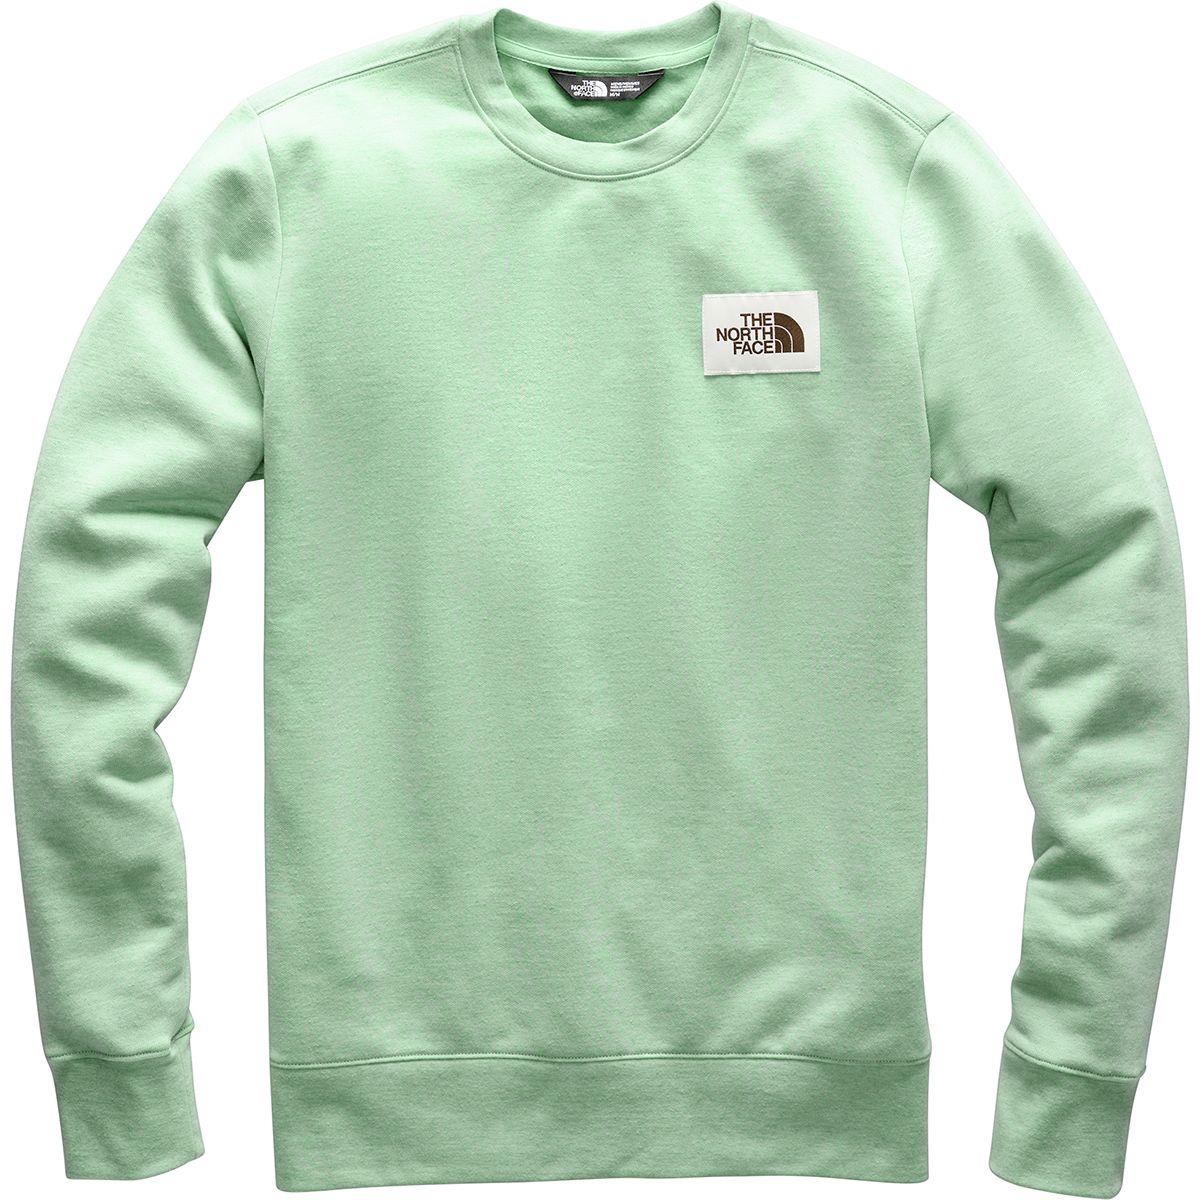 The North Face Heritage Crew Sweatshirt in Green for Men - Lyst